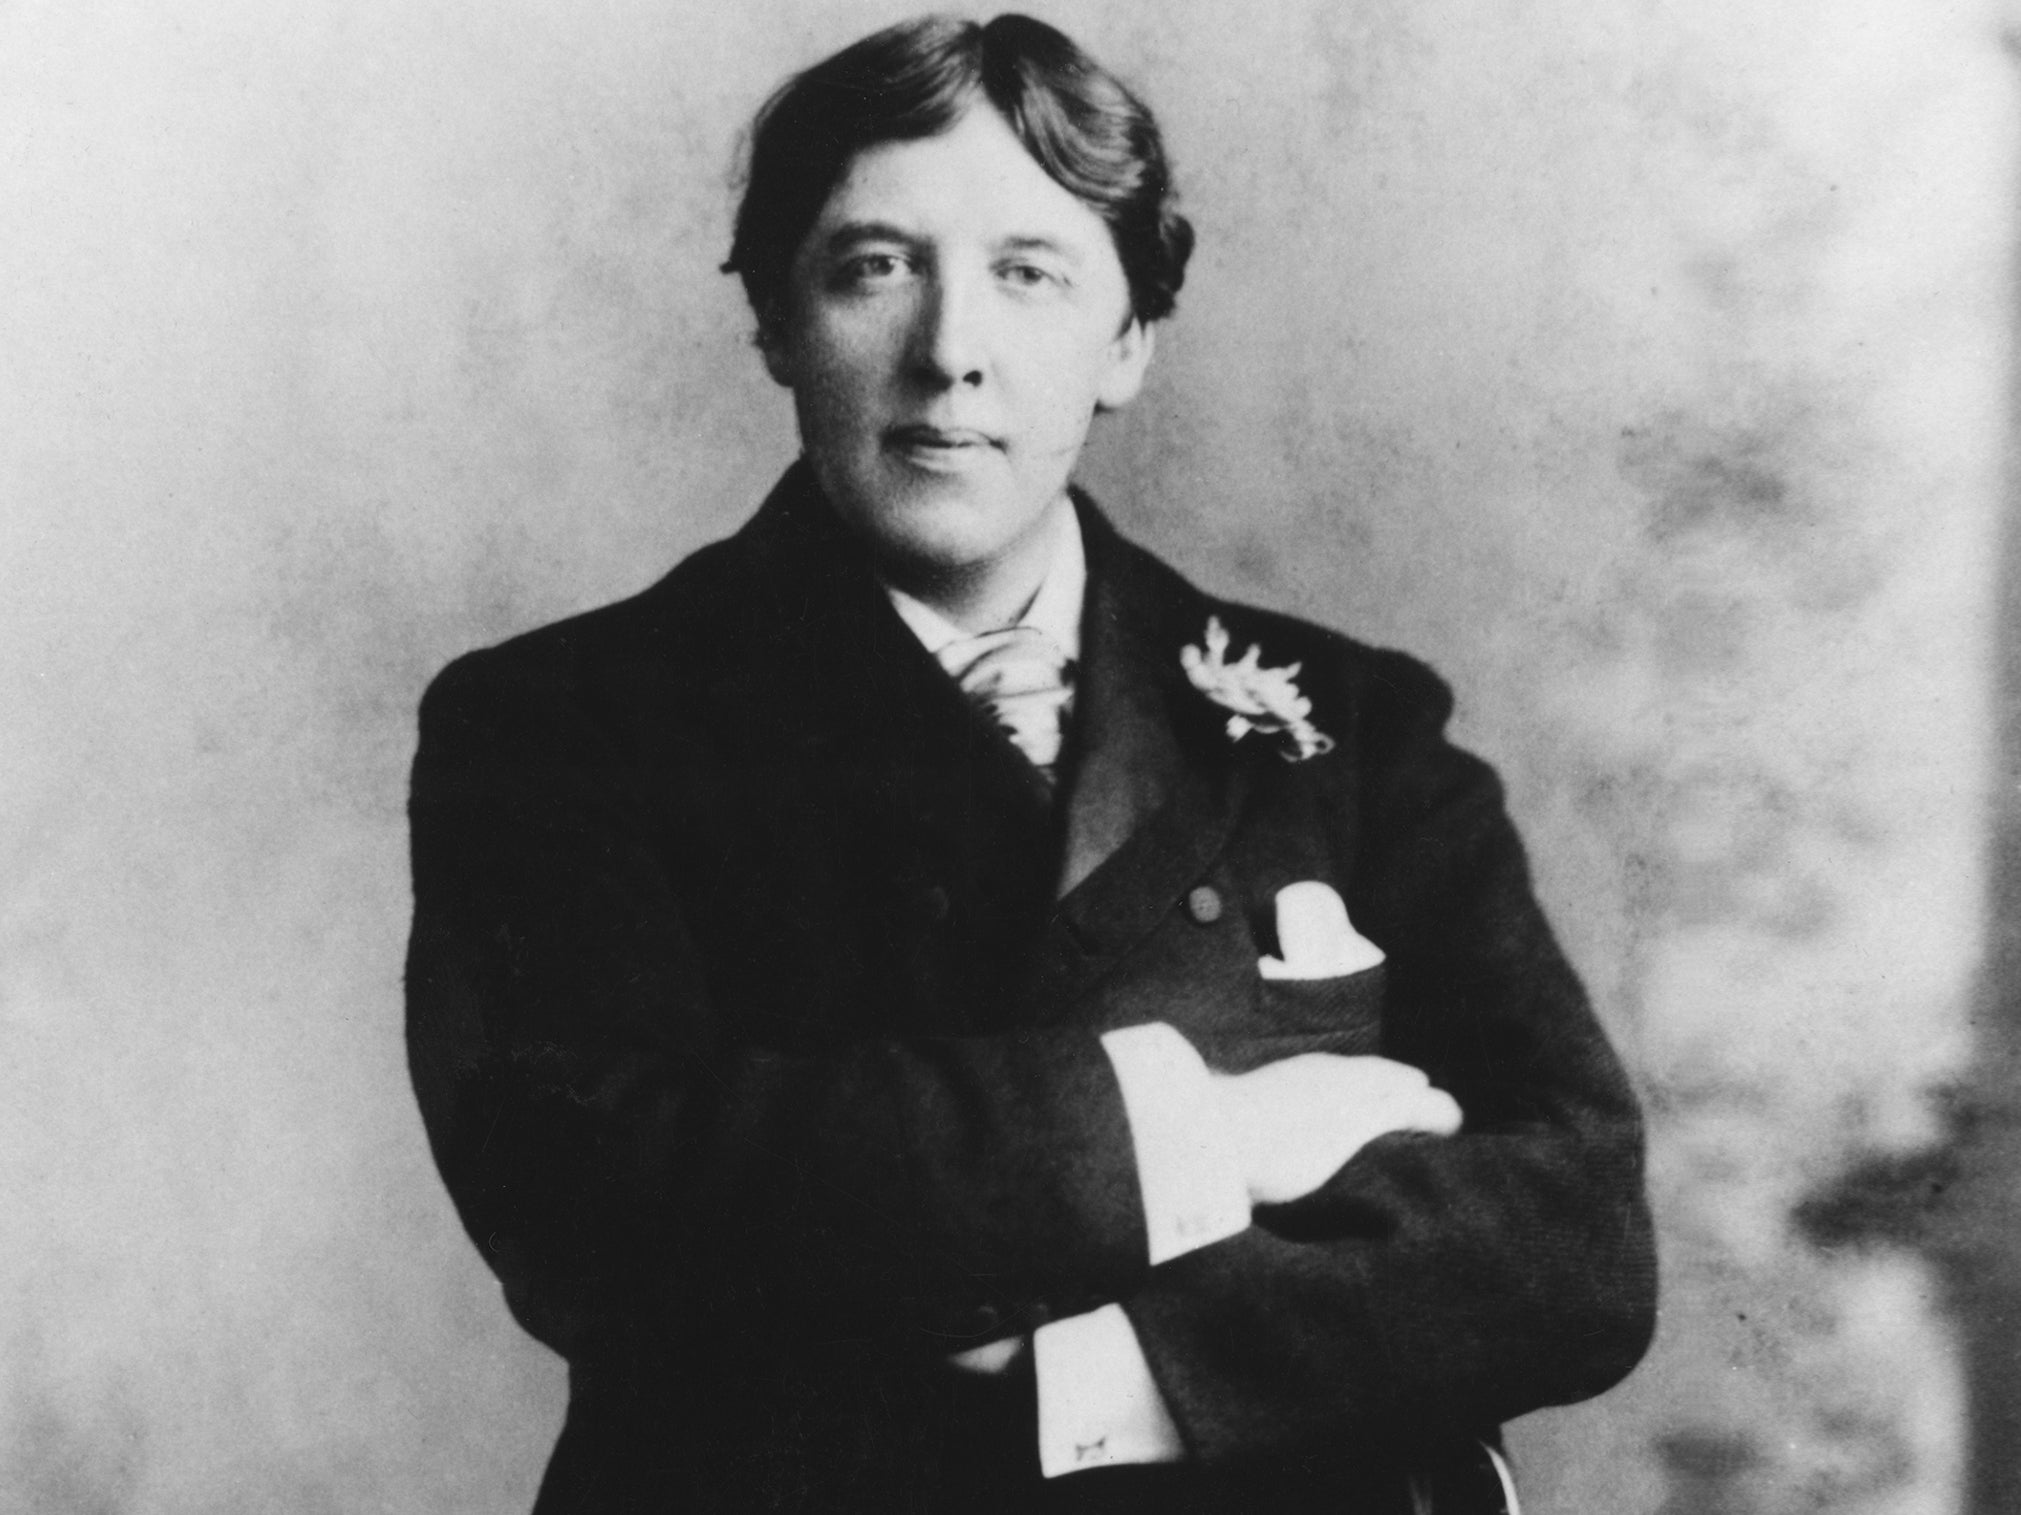 Oscar Wilde spoke of relationships between younger and older gay men during his testimony in a trial for gross indecency in 1895